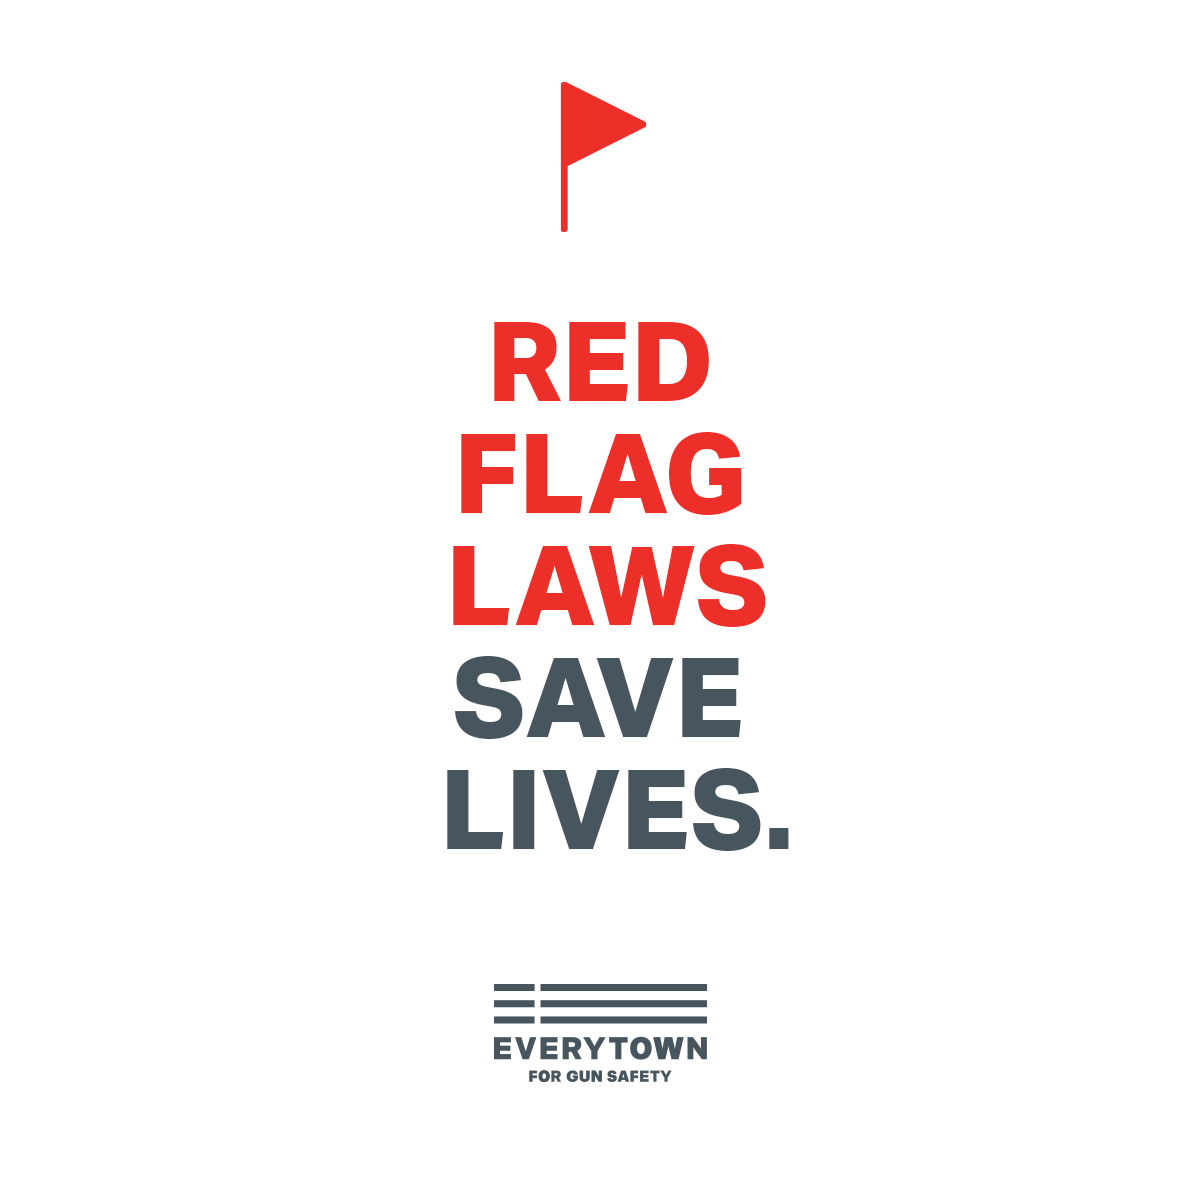 Reminder: red flag laws save lives AND they’re constitutional.
Want to learn more? Click here!